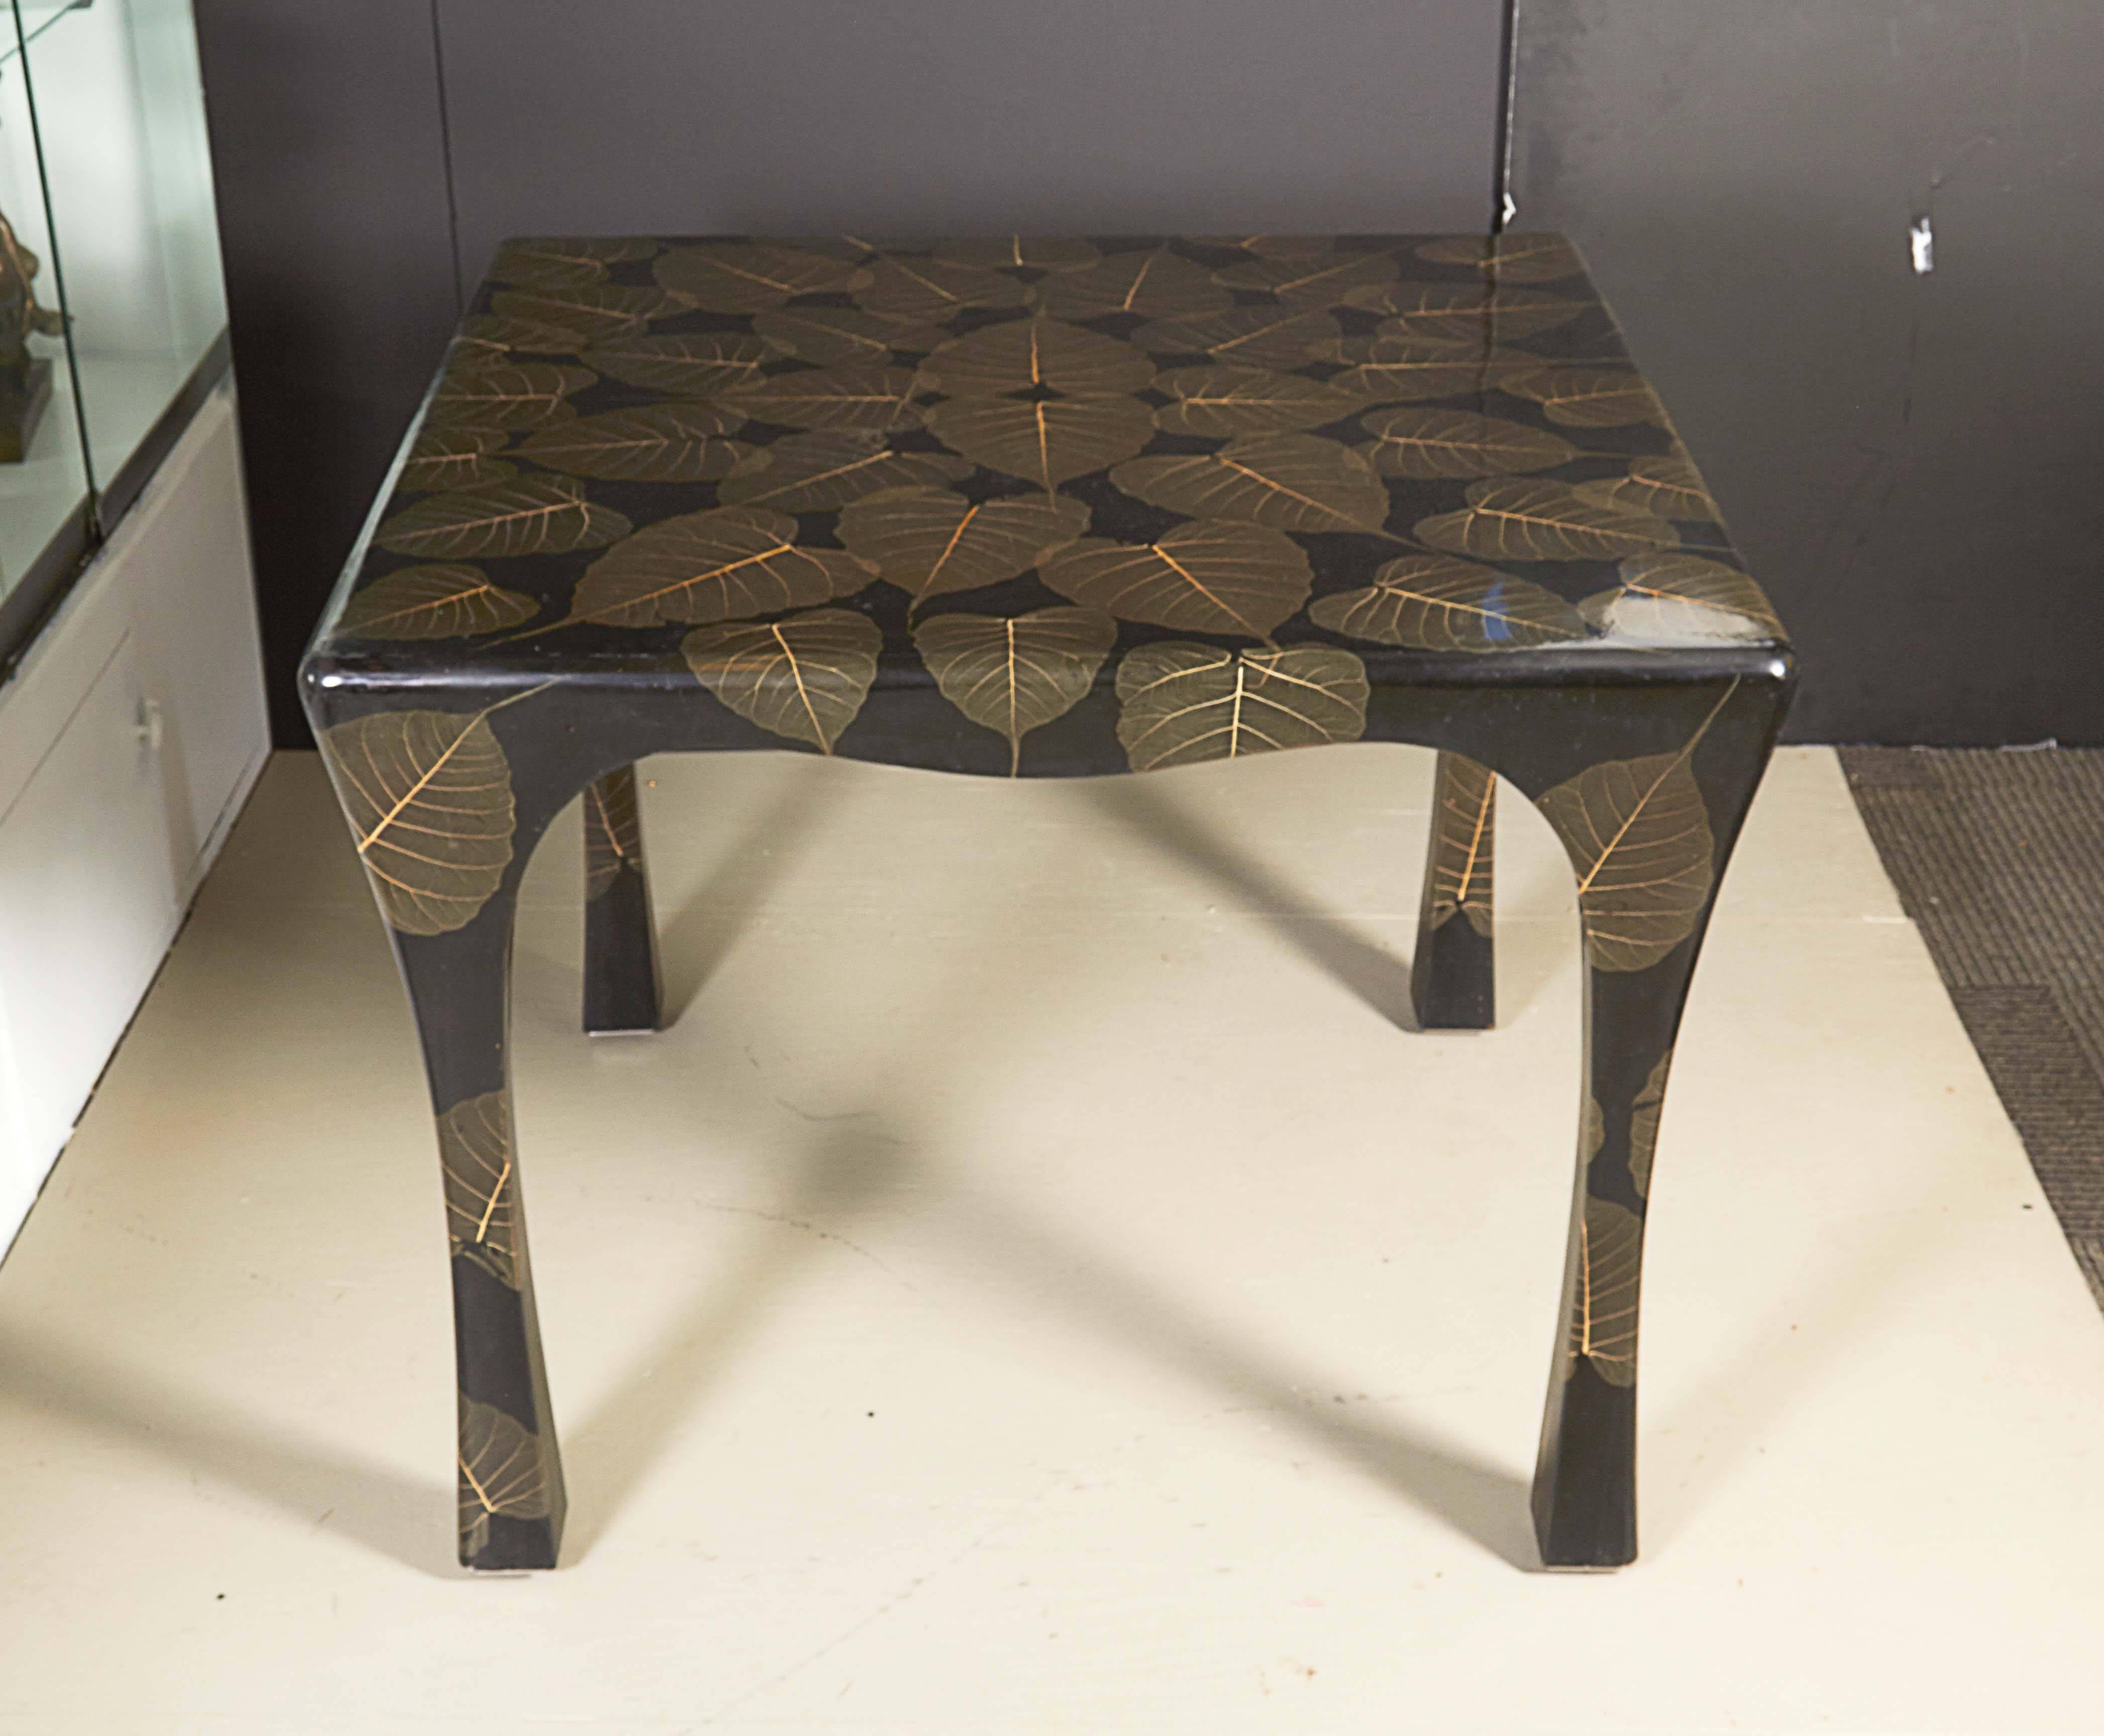 A vintage card table from the Mid-Century Modern era, the serpentine form inspired by Asian designs, entirely in black lacquered wood, surface layered with organic leaves and high gloss finish. Very good condition with age appropriate wear.

10858